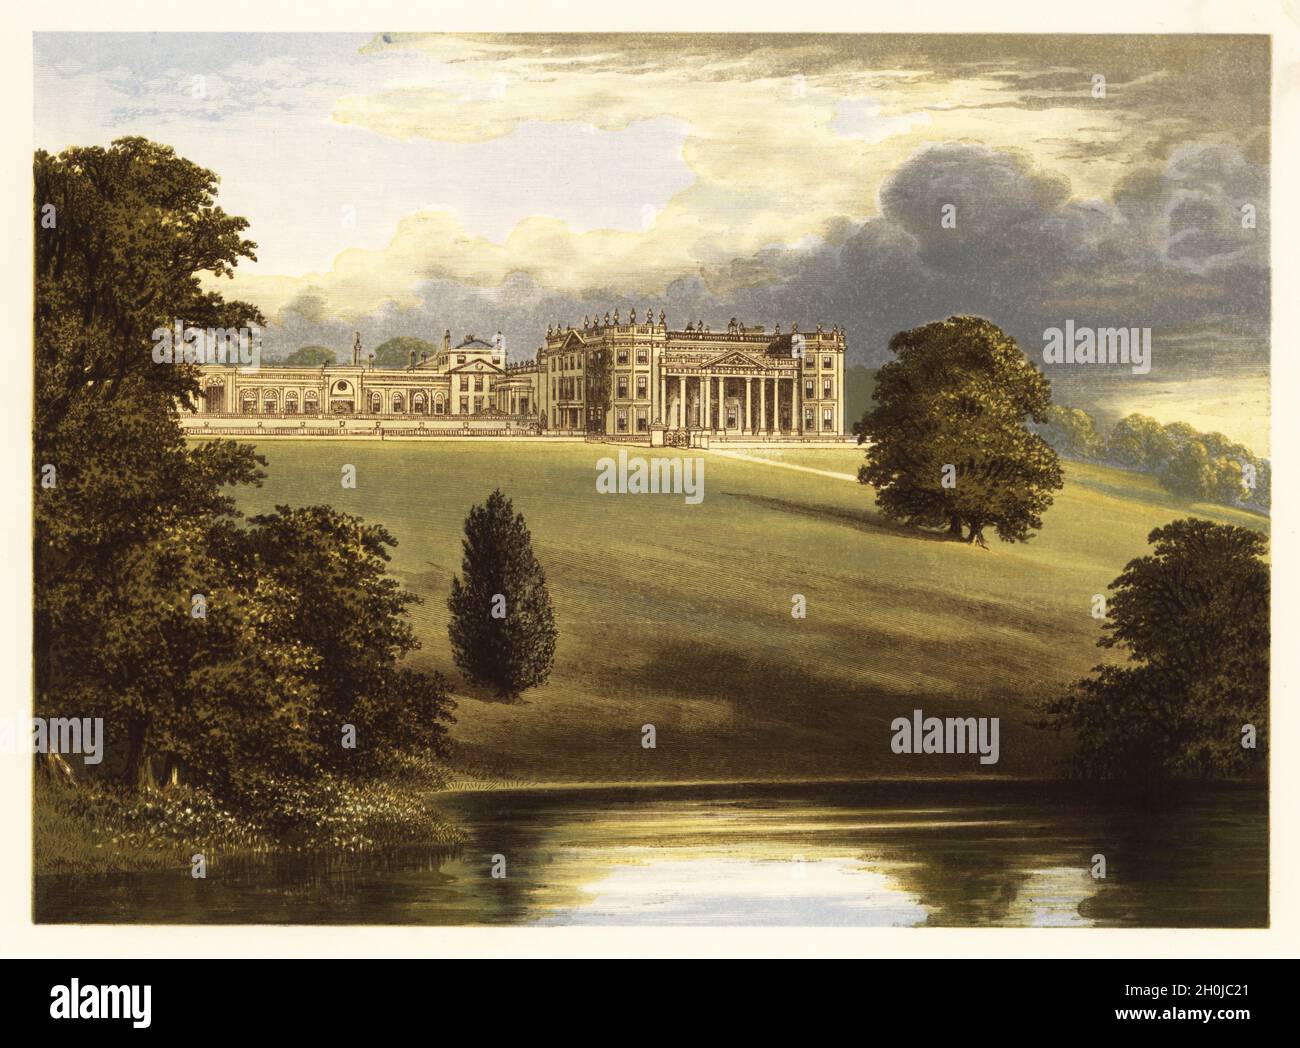 Bowood House, Wiltshire, England. Georgian house with interiors and mausoleum by Robert Adam and gardens landcaped by Lancelot Capability Brown. Colour woodblock by Benjamin Fawcett in the Baxter process of an illustration by Alexander Francis Lydon from Reverend Francis Orpen Morris’s Picturesque Views of the Seats of Noblemen and Gentlemen of Great Britain and Ireland, William Mackenzie, London, 1880. Stock Photo